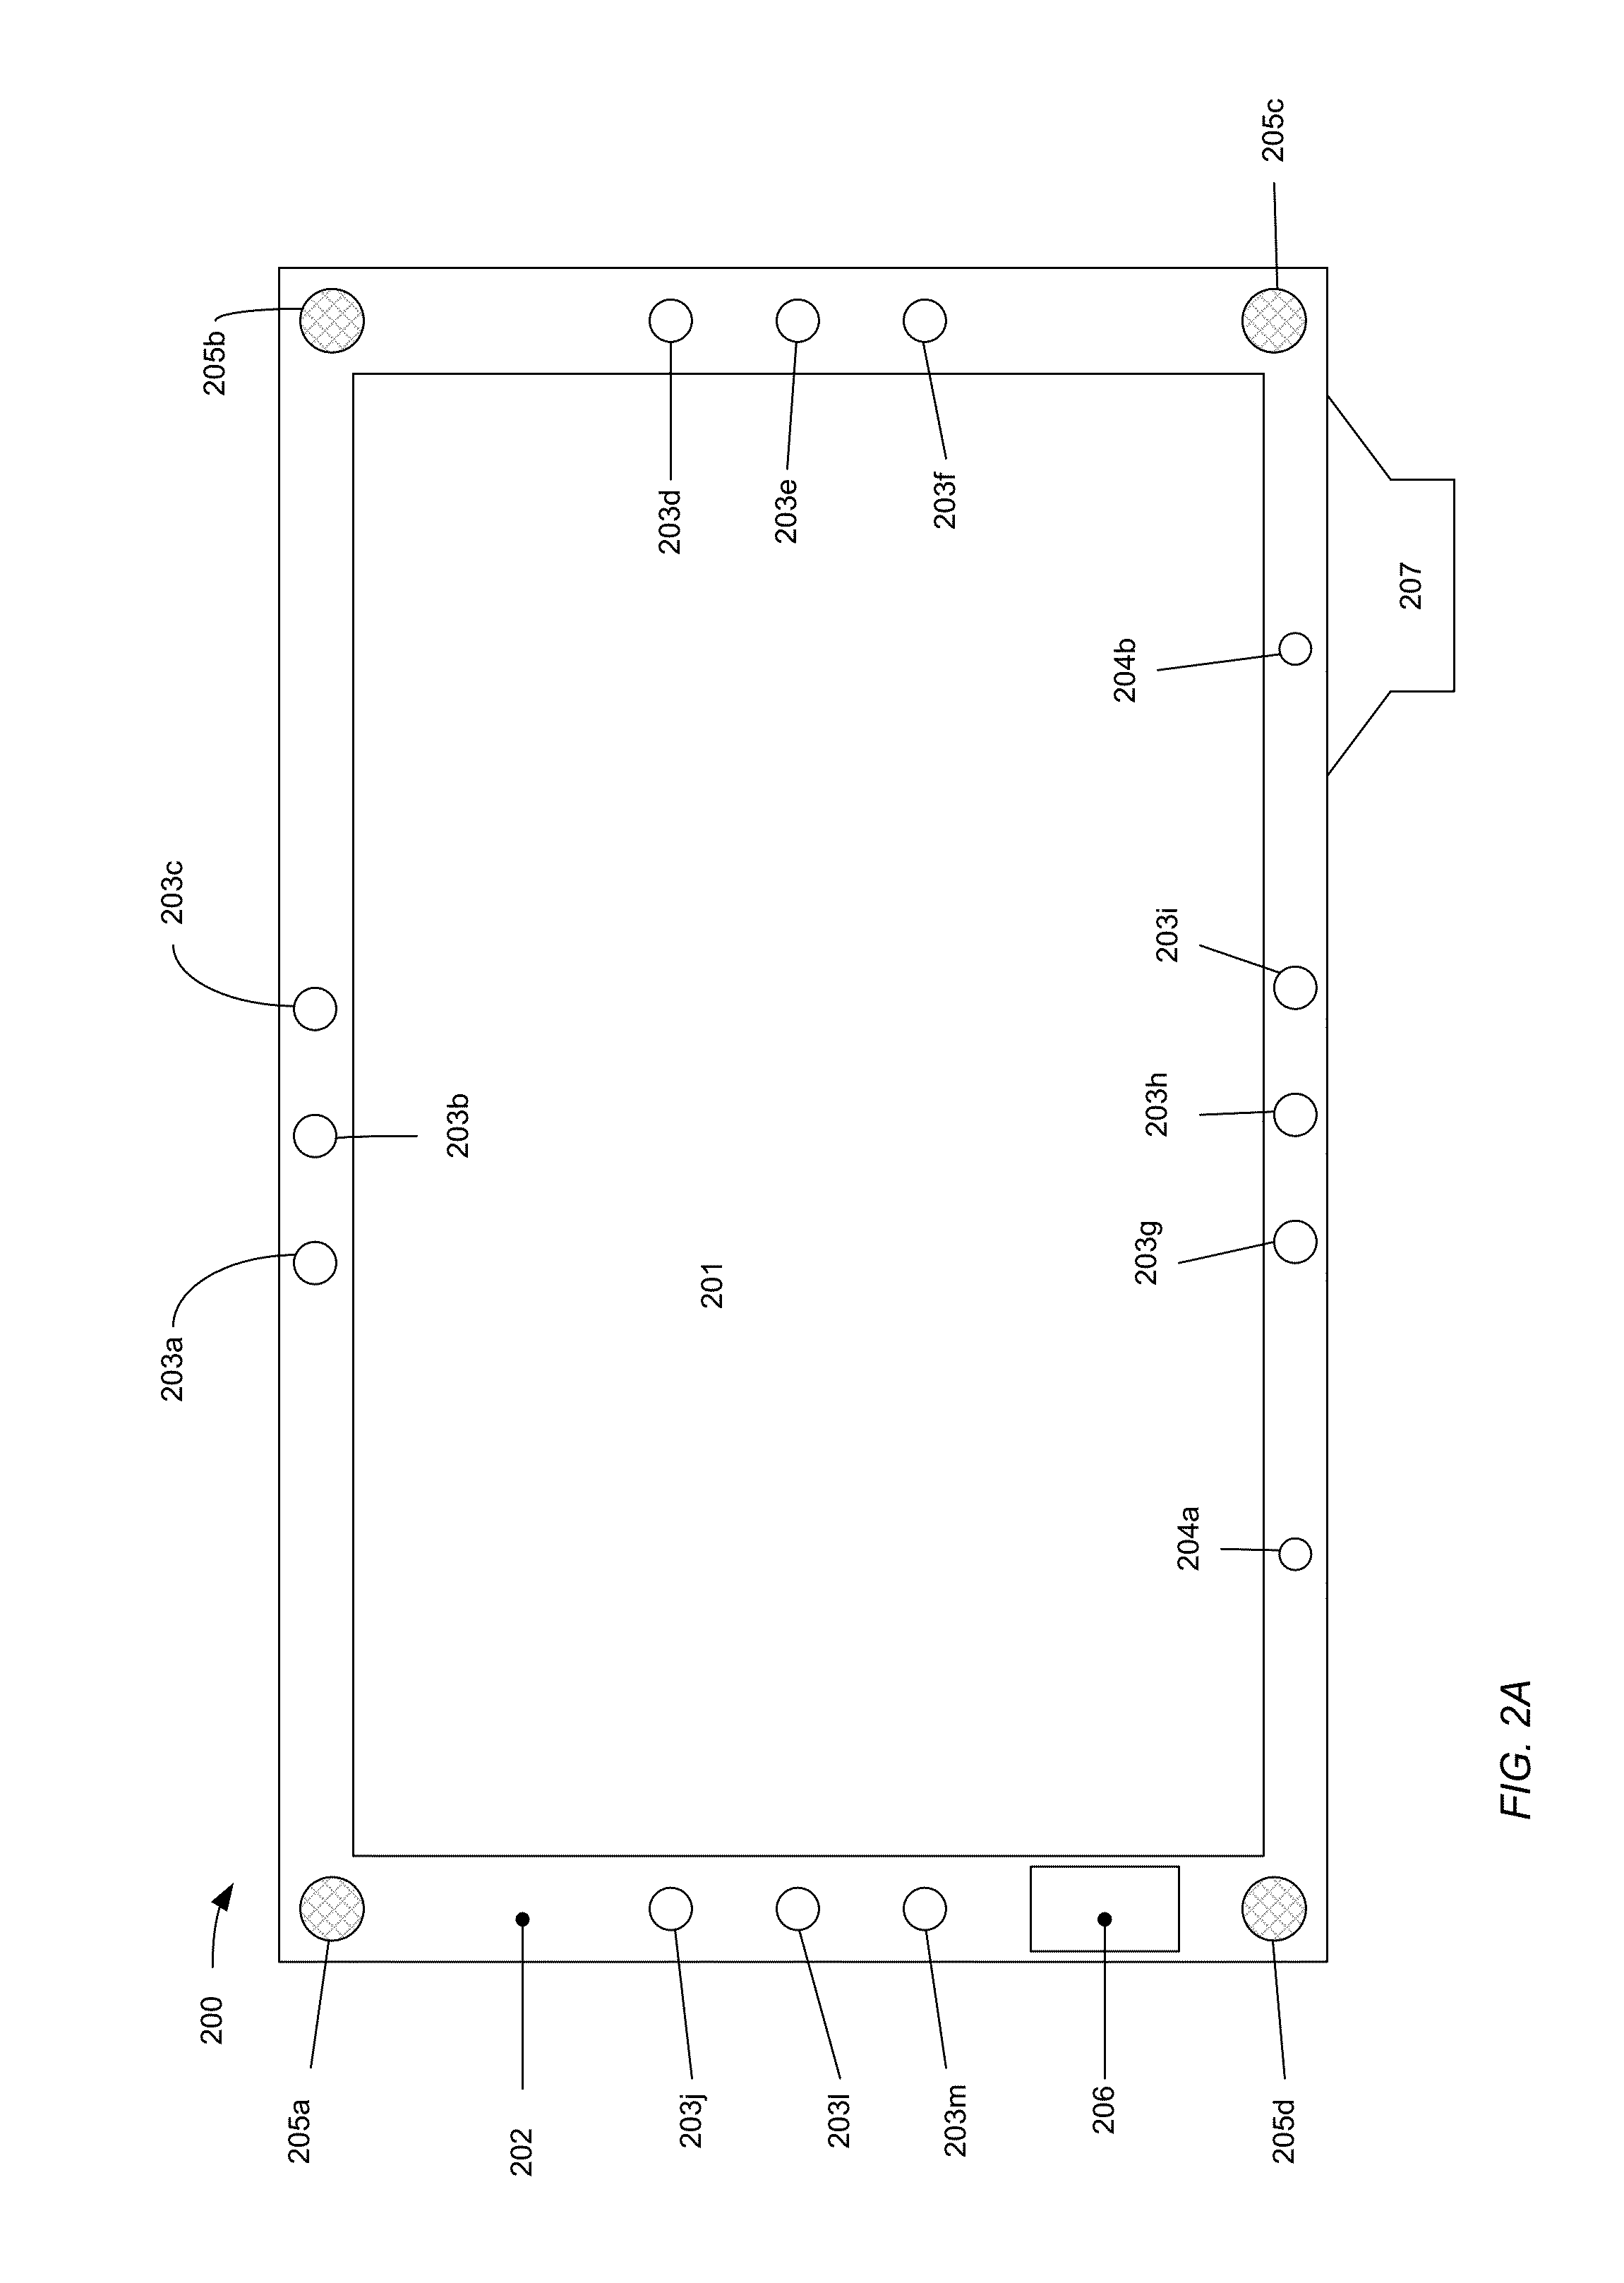 Method and Apparatus for Enhanced Personal Care with Interactive Diary Function